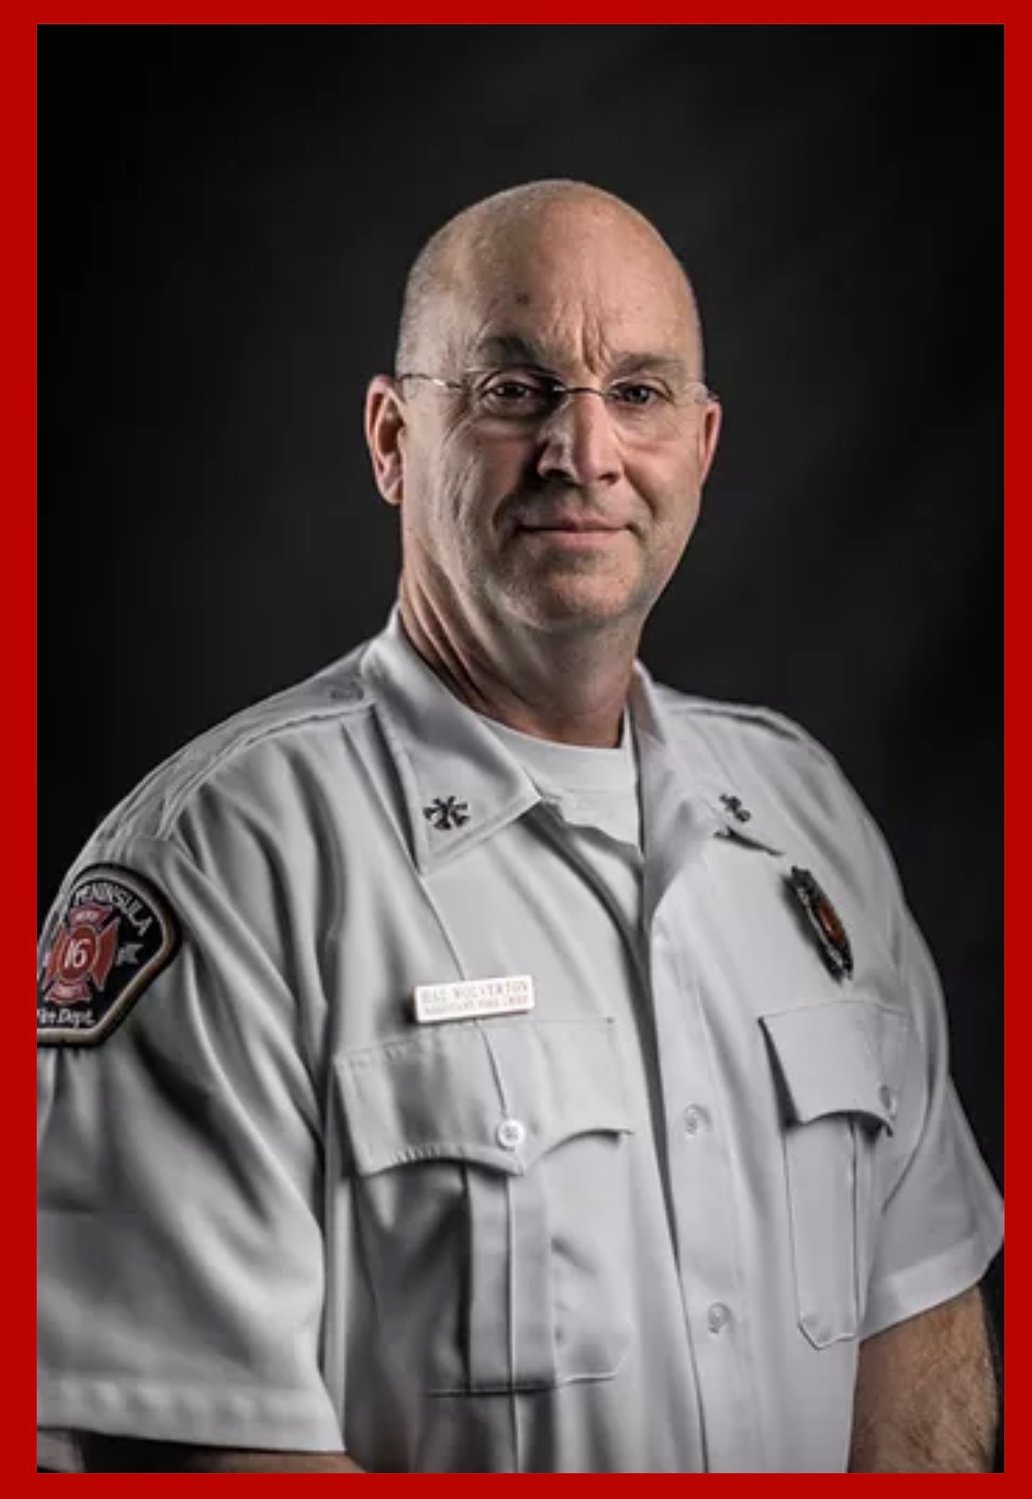 Assistant Fire Chief Hal Wolverton returned to duty for KPFD March 23.